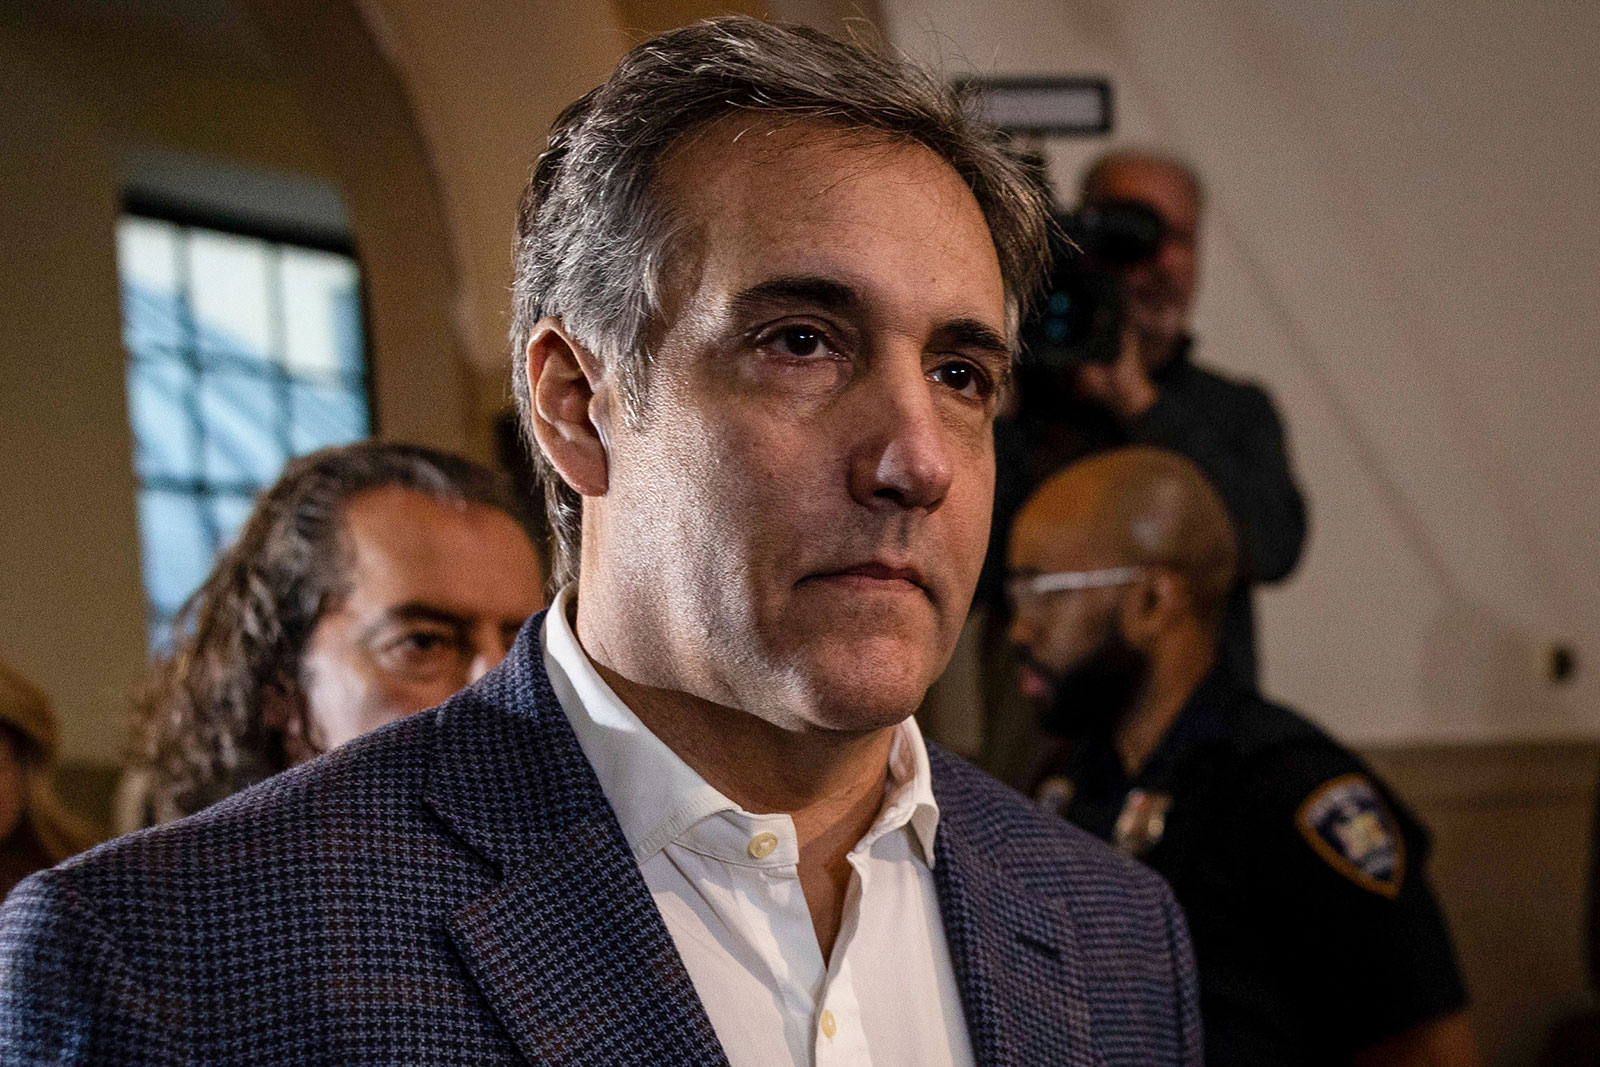 Cohen returns to the courthouse after a break on Tuesday, October 24.